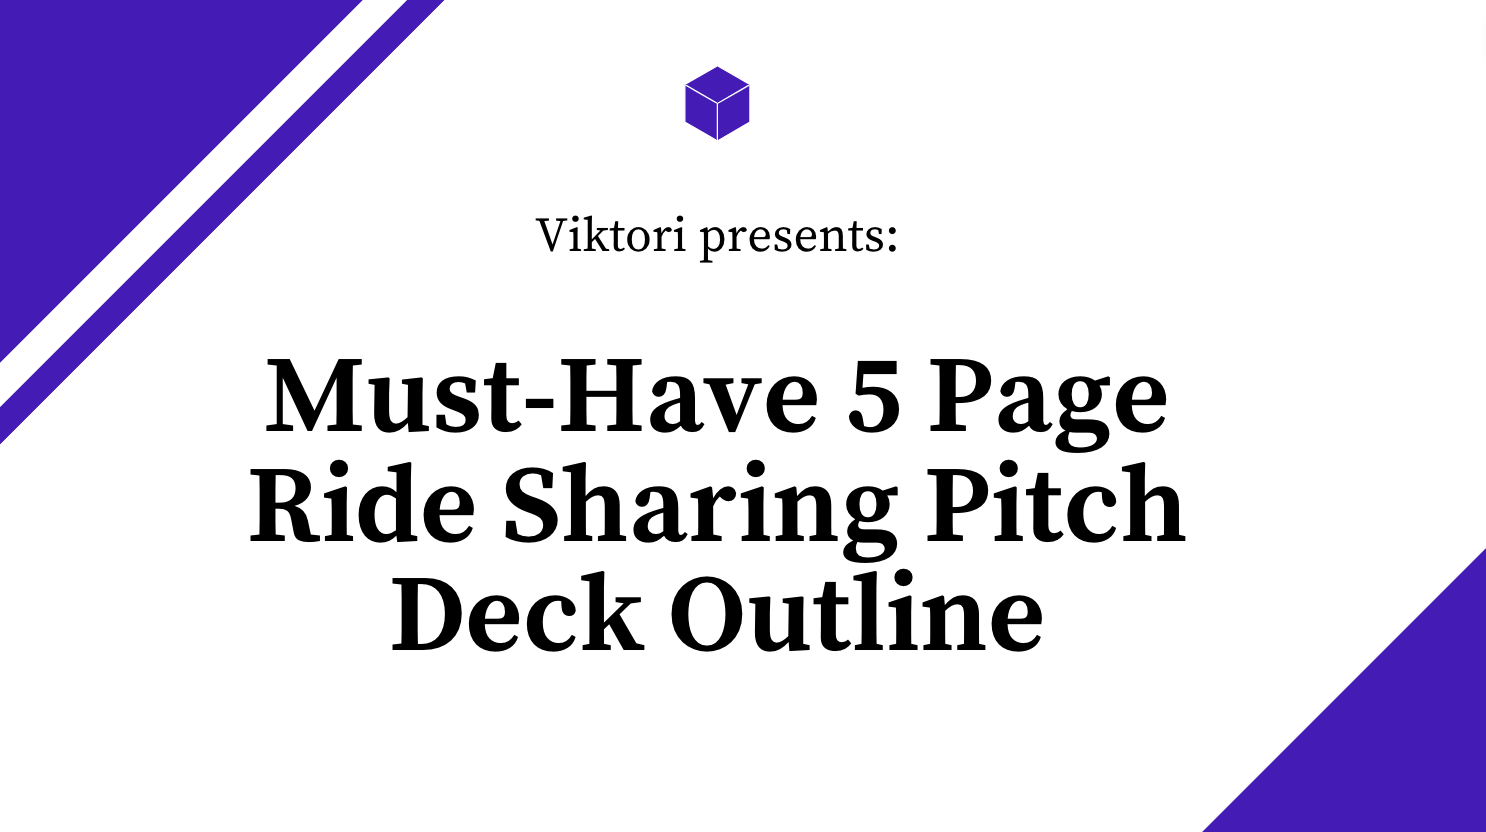 ride sharing pitch deck outline